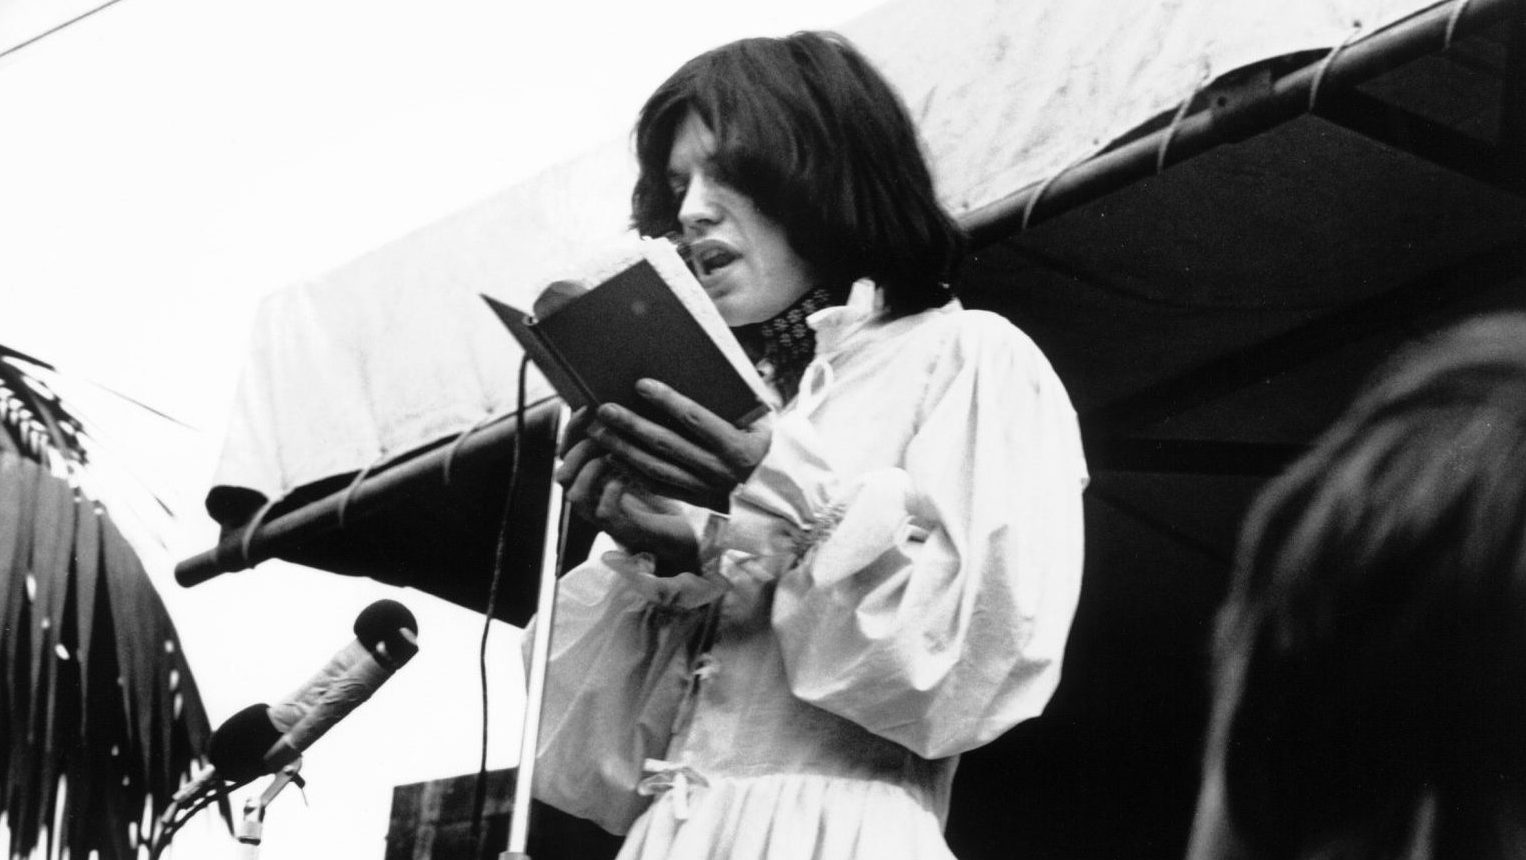 Mick Jagger reads Shelley’s Adonais in tribute to Rolling Stones guitarist Brian Jones in Hyde Park, 1969. Photo: Chris Walter/WireImage/Getty